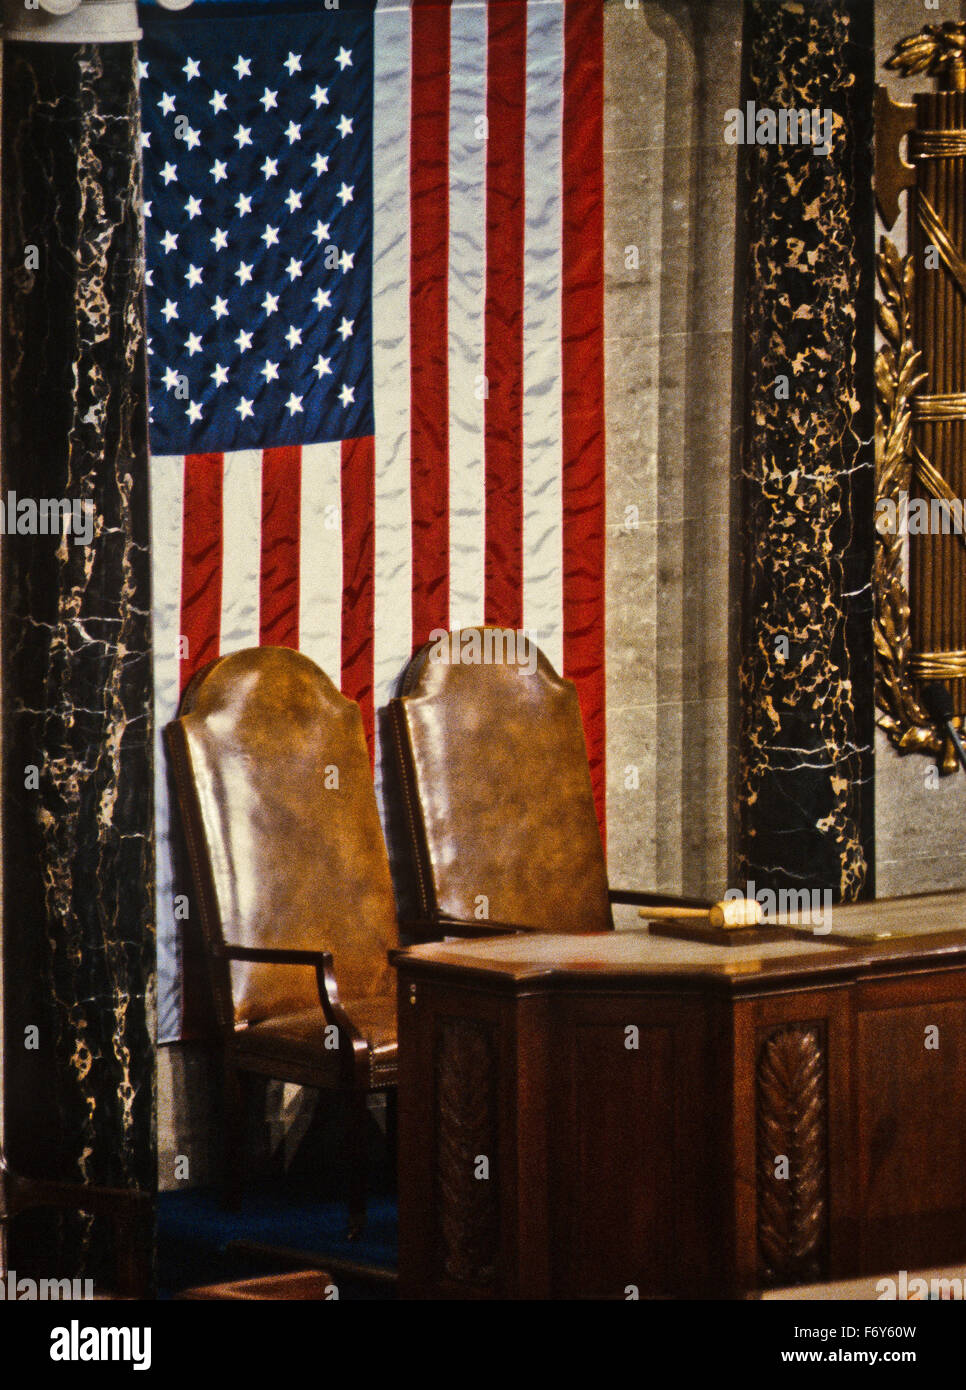 Washington, DC. January, 1992 The American flag hangs behind the empty Speaker of the House and the Vice-President chairs in the The House Chamber, also known as the 'Hall of the House of Representatives.' Legislative activities in the House of Representatives begin and end in the House Chamber. Here, bills are introduced, debated, and voted on. Electoral votes are counted. The Presidents State of the Union address and Joint Sessions and Joint Meeting of the House and Senate are held. Credit: Mark Reinstein Stock Photo